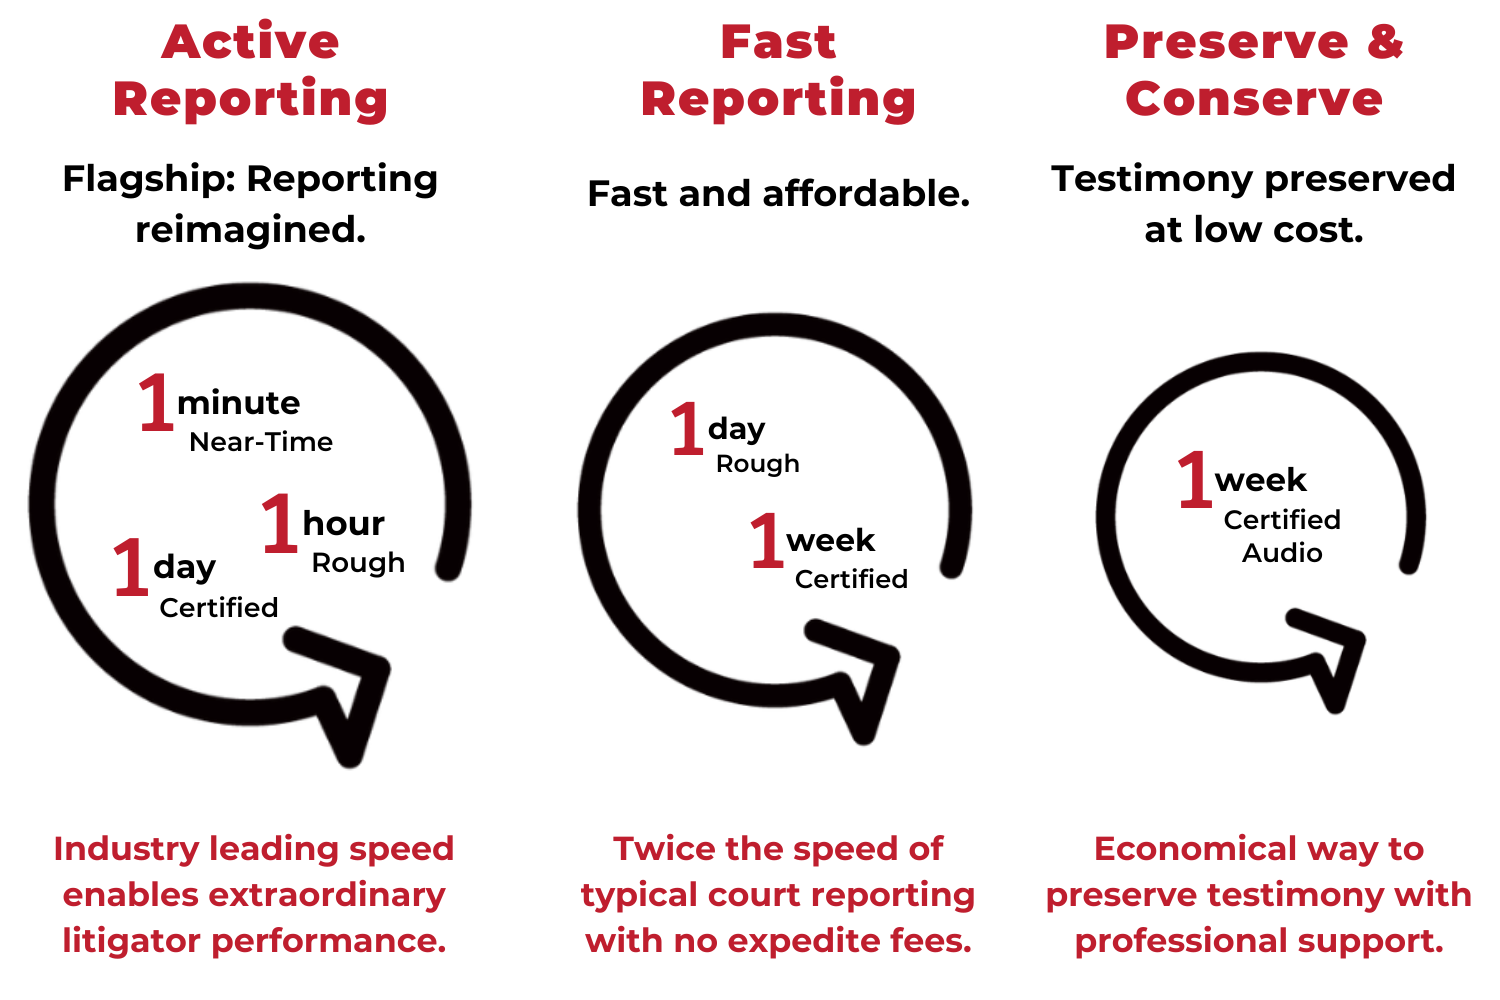 A graphic showing Readback's three service tiers with their respective turnaround times. Active Reporting: 1 minute near-time, 1 hour rough, 1 day certified. Fast Reporting: 1 day rough, 1 week certified. Preserve & Conserve: 1 week certified audio.